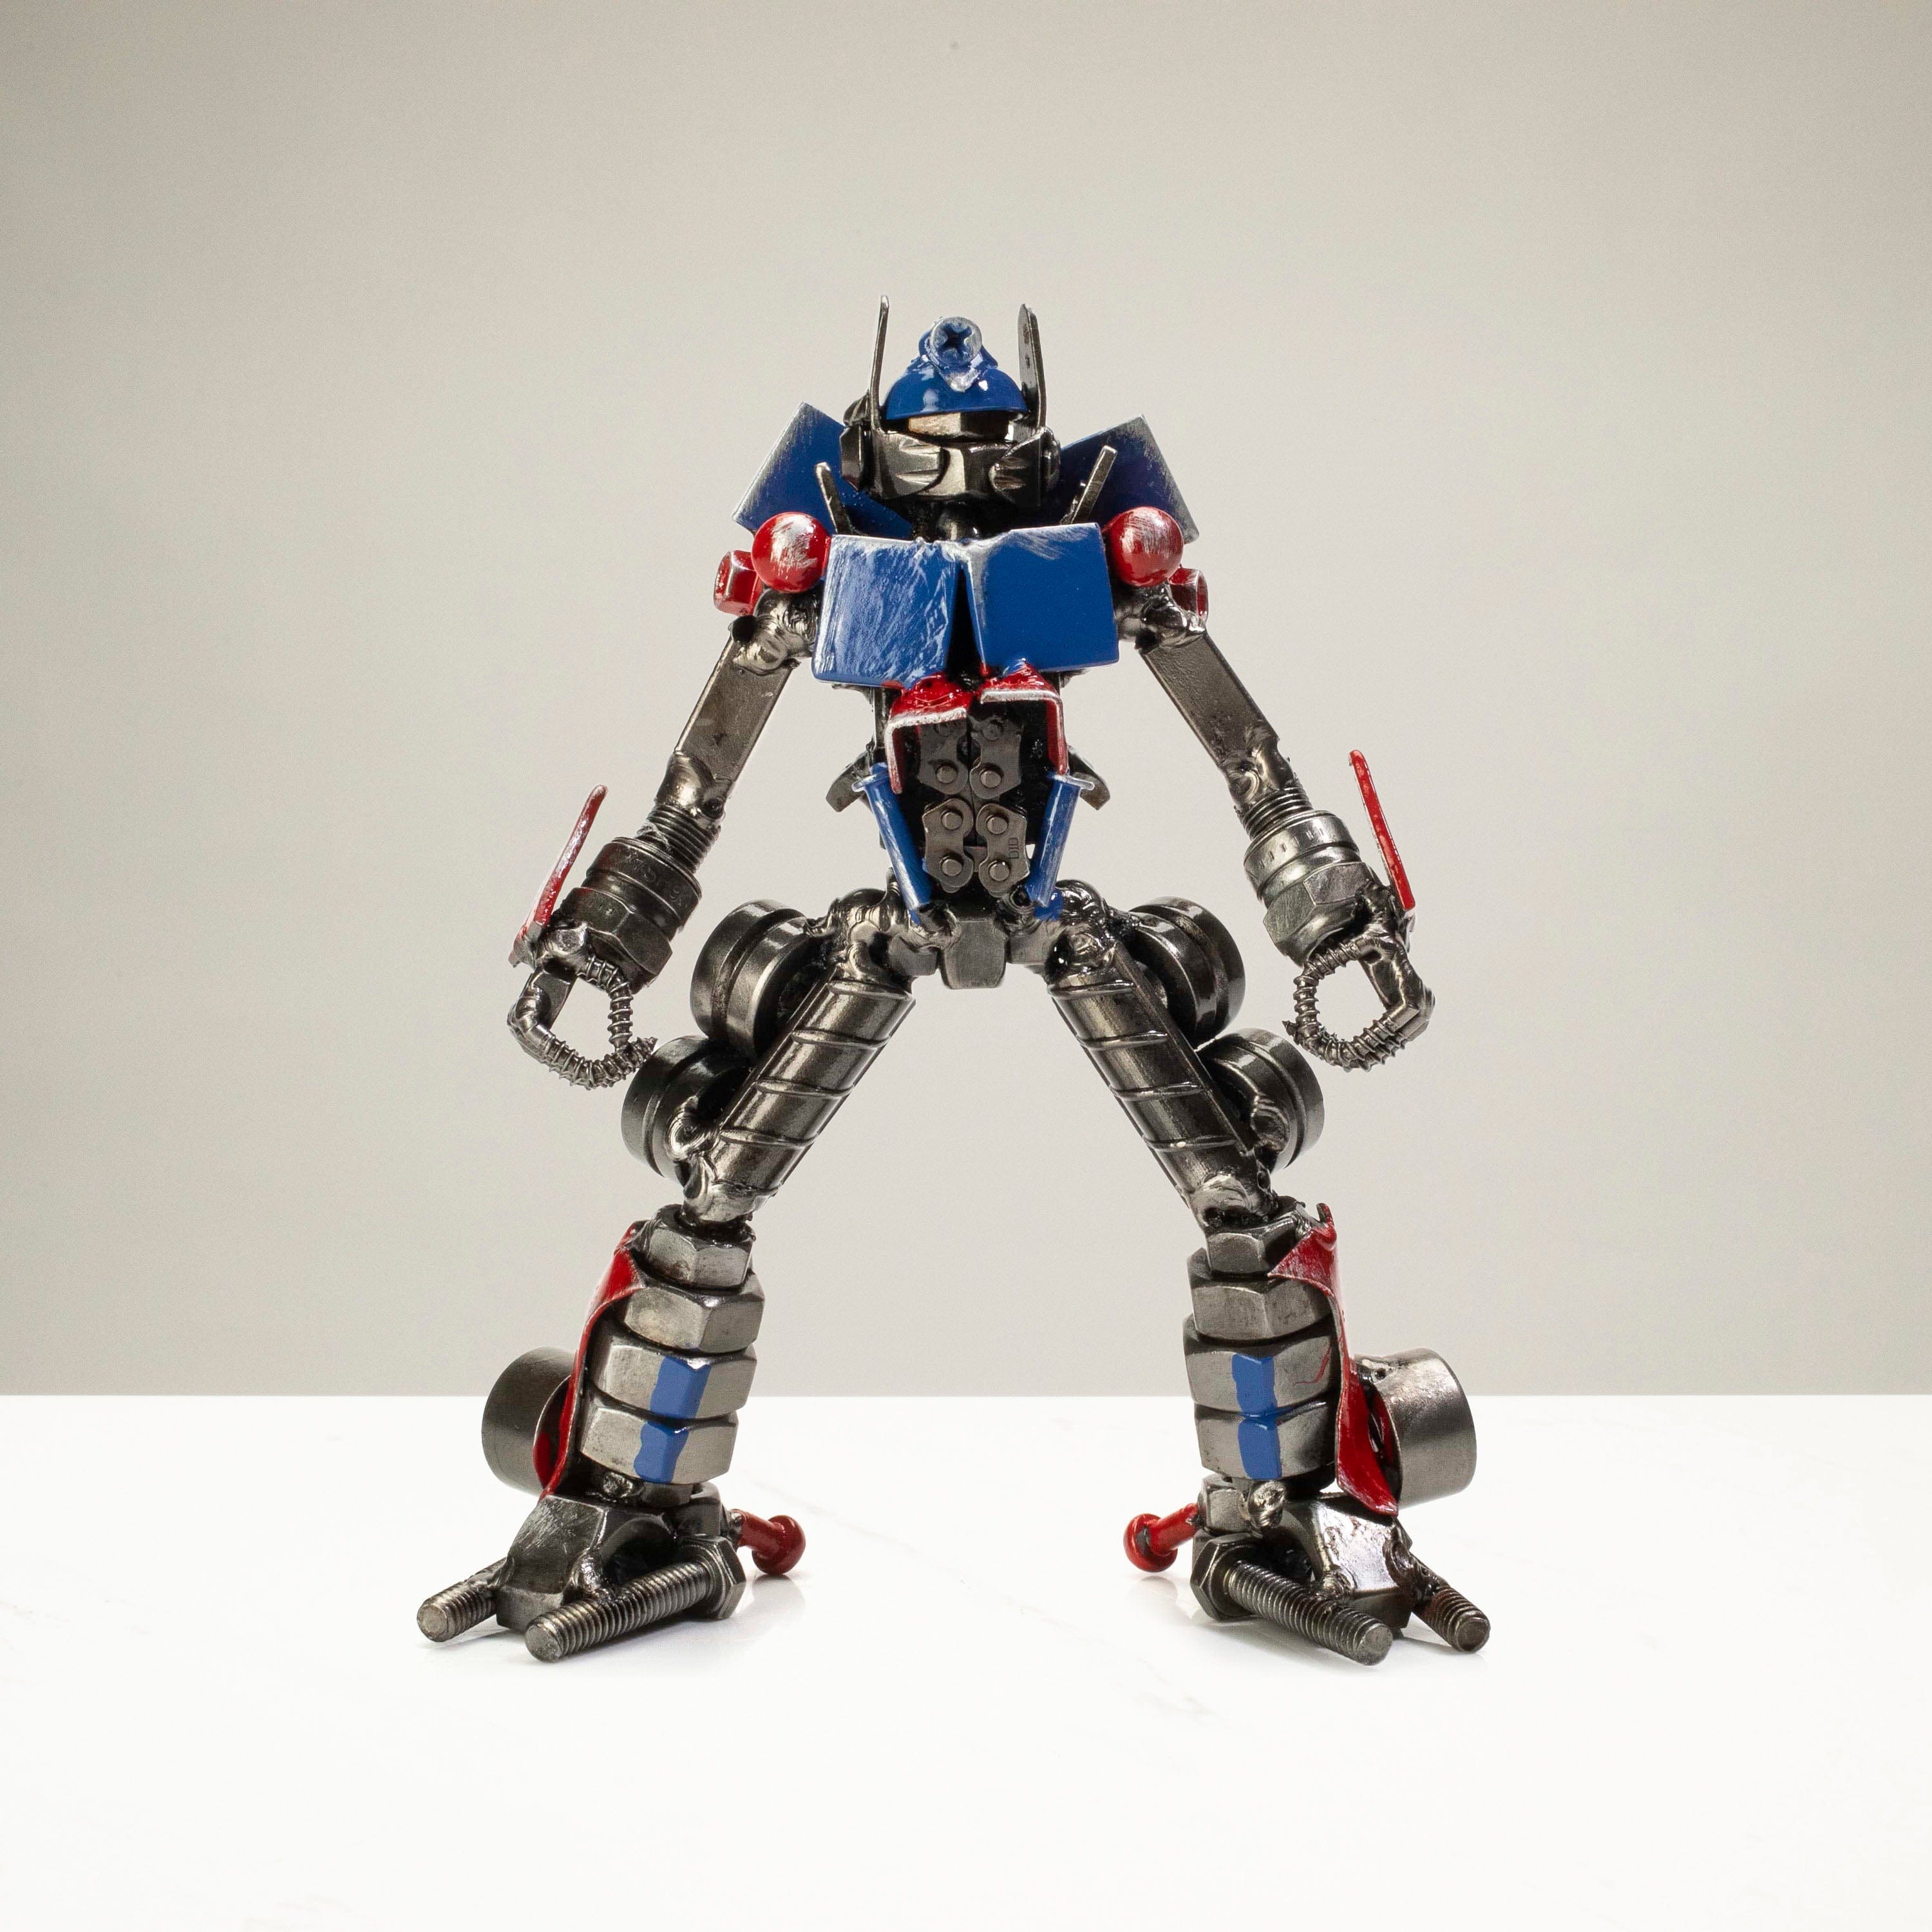 Kalifano Recycled Metal Art 7" Optimus Prime Inspired Recycled Metal Sculpture RMS-450OPA-N